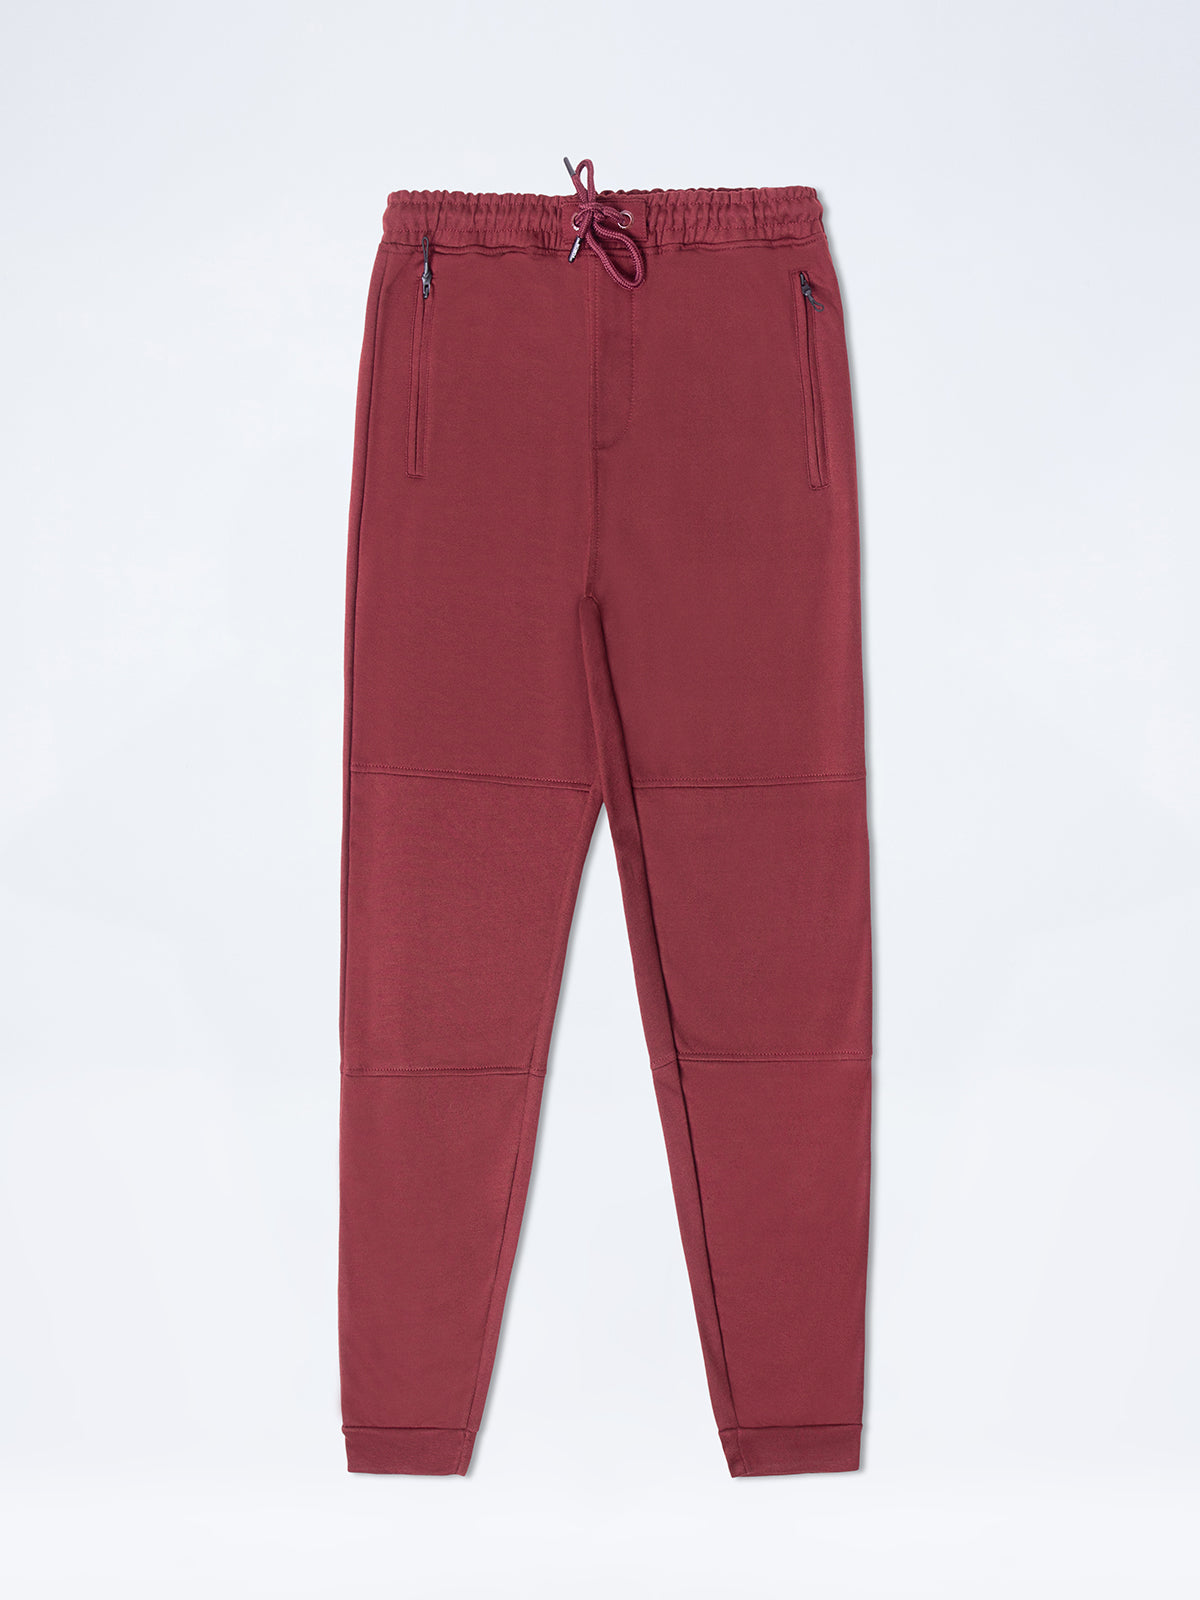 French Terry Jog Pant - FMBT24-003